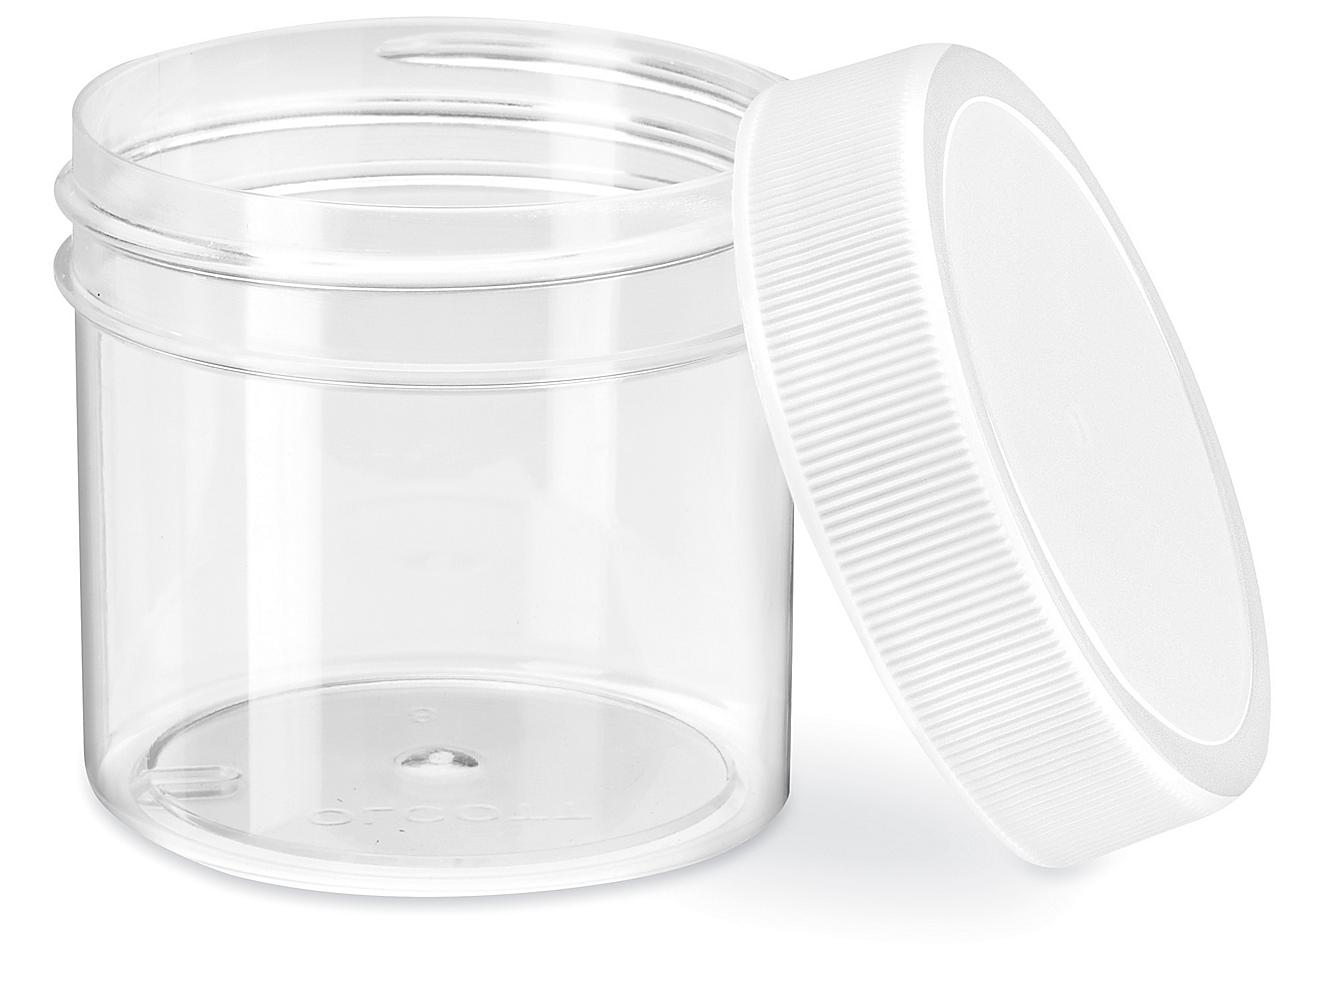 1/2 OZ CLEAR ROUND WIDE-MOUTH PLASTIC JAR WITH WHITE SCREW CAP 12 24 72 144 288 